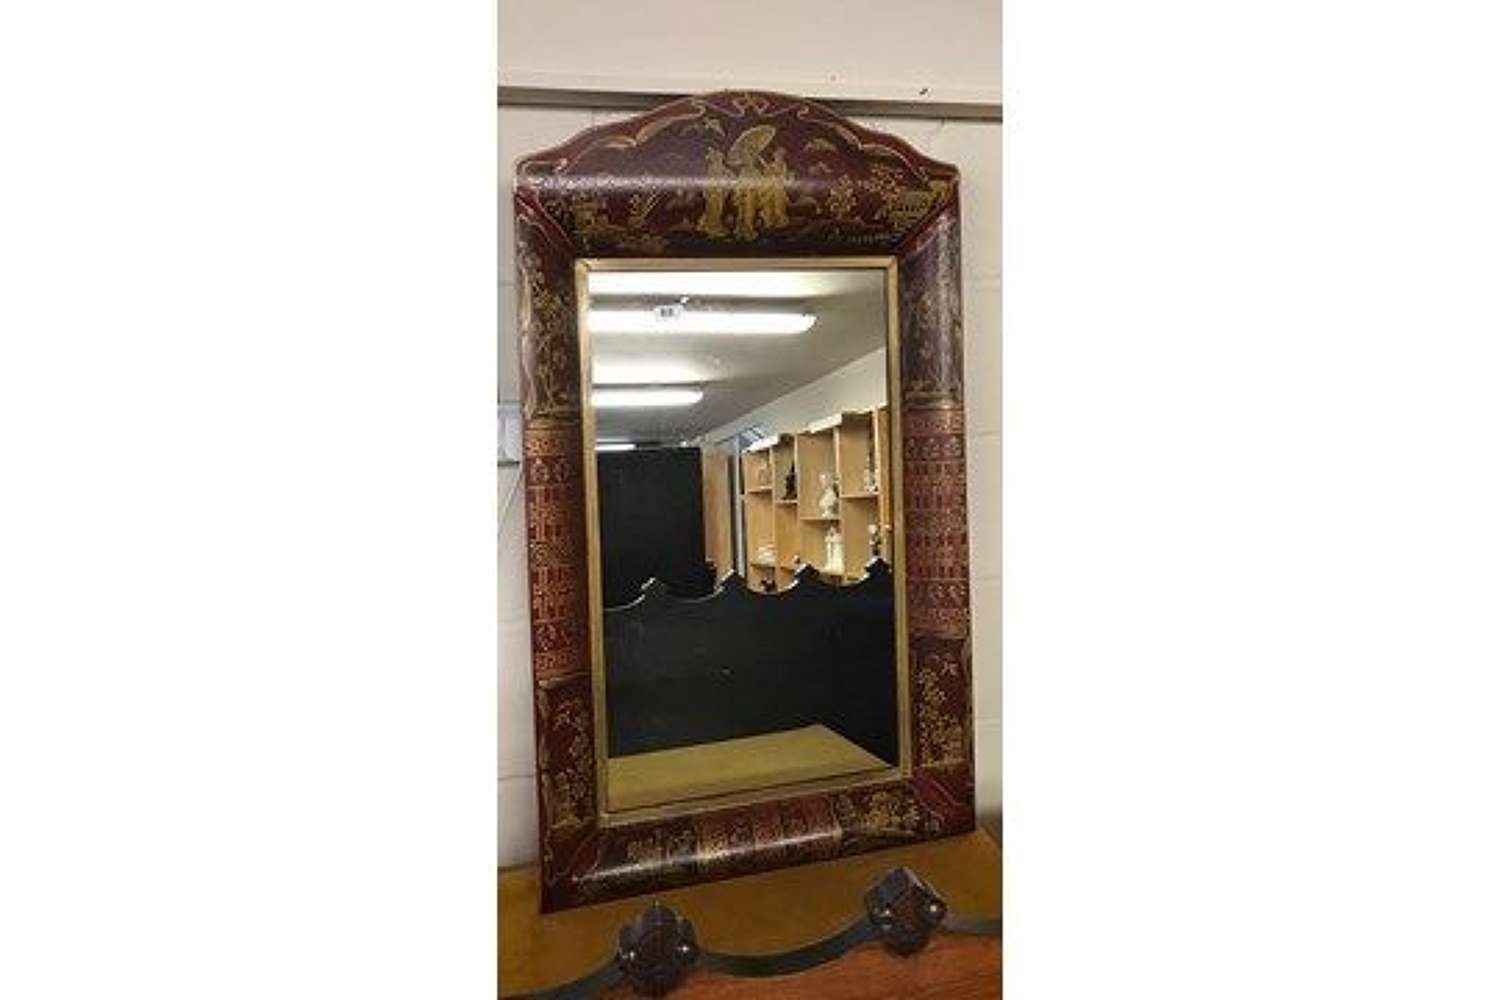 Japanese Lacquer Decorated Metal Mirror